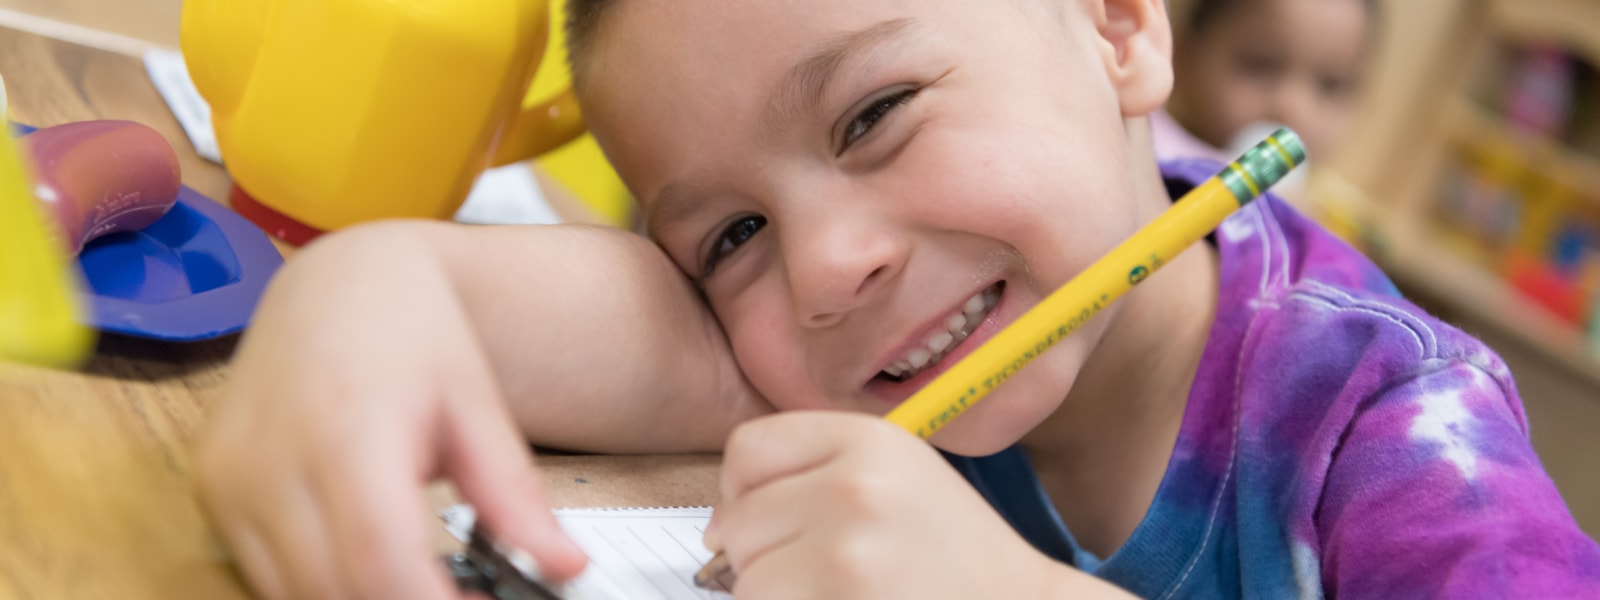 Preschool student smiling while writing